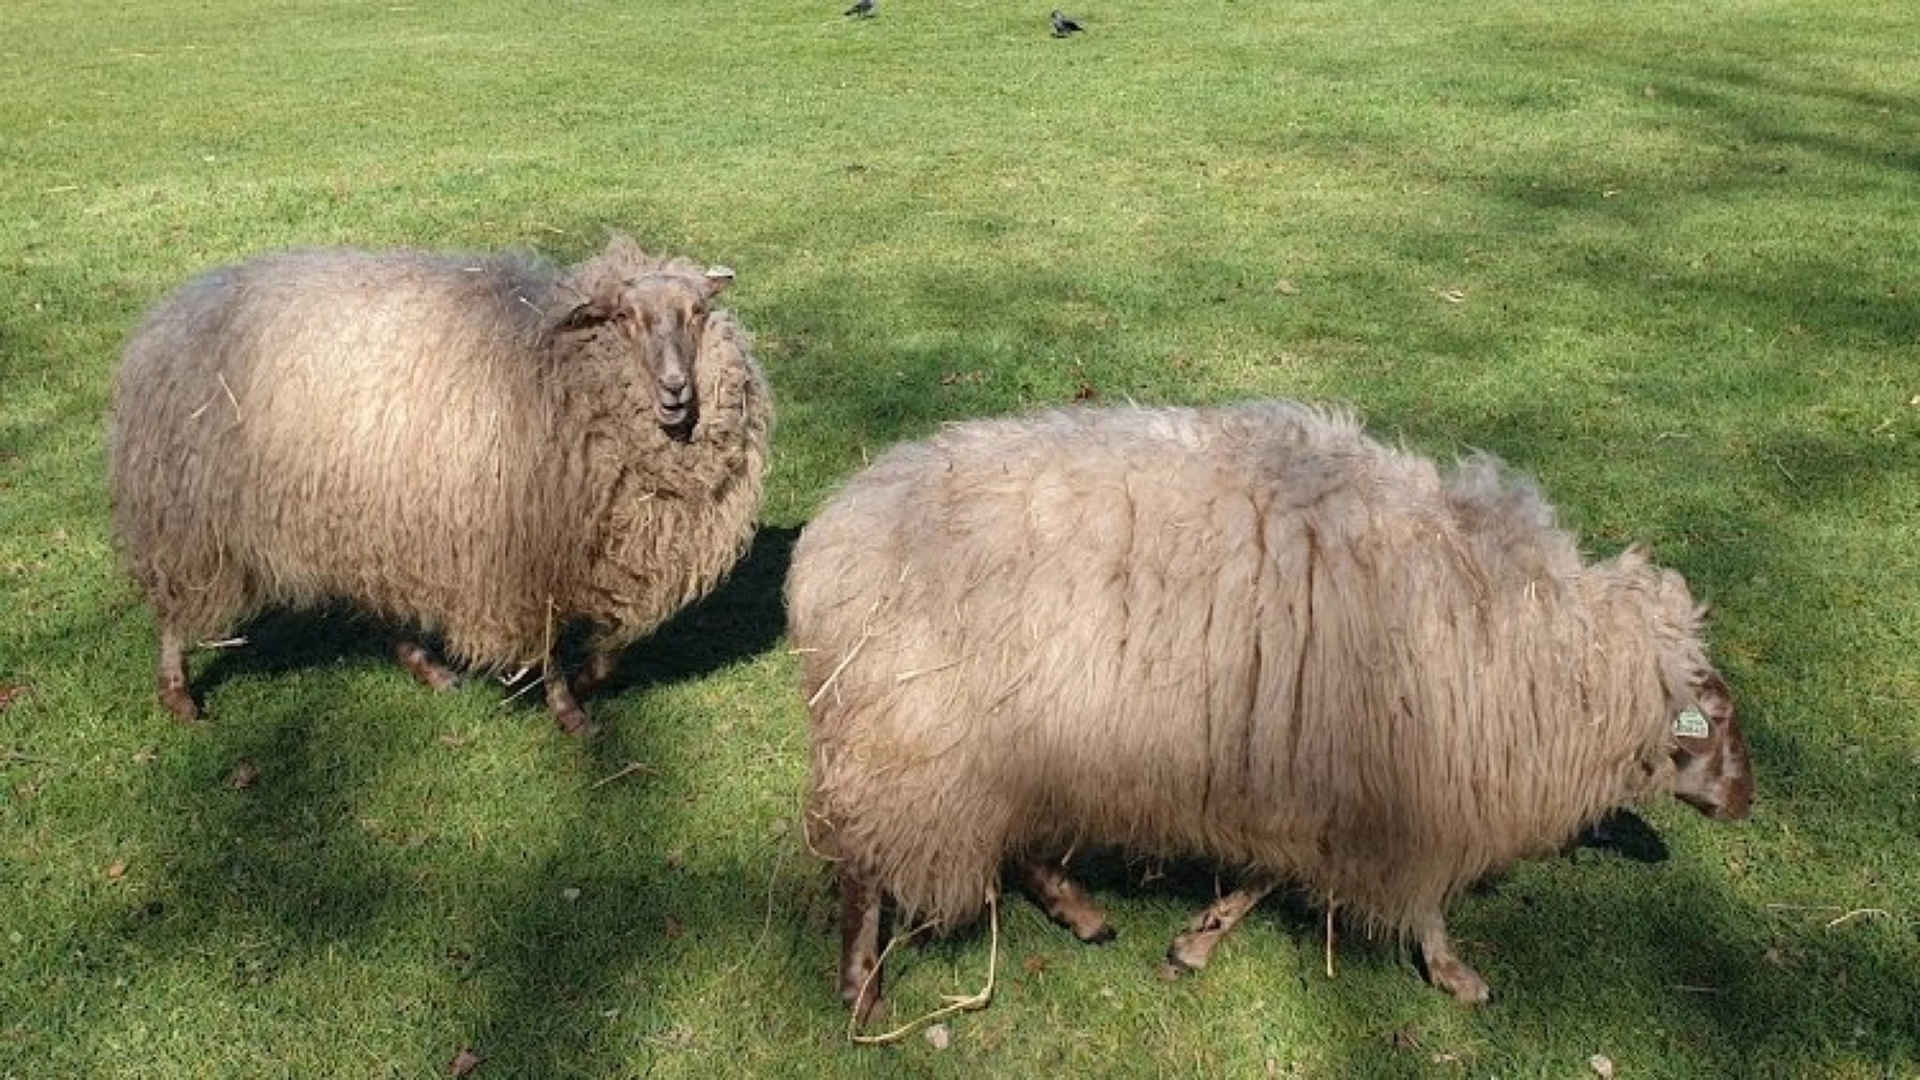 @ethicistforhire, March 22, 2020 "I tried to tell the sheep that they were not staying socially distant from each other, but they just wouldn't listen. Guess this must be how Nietzsche felt..."